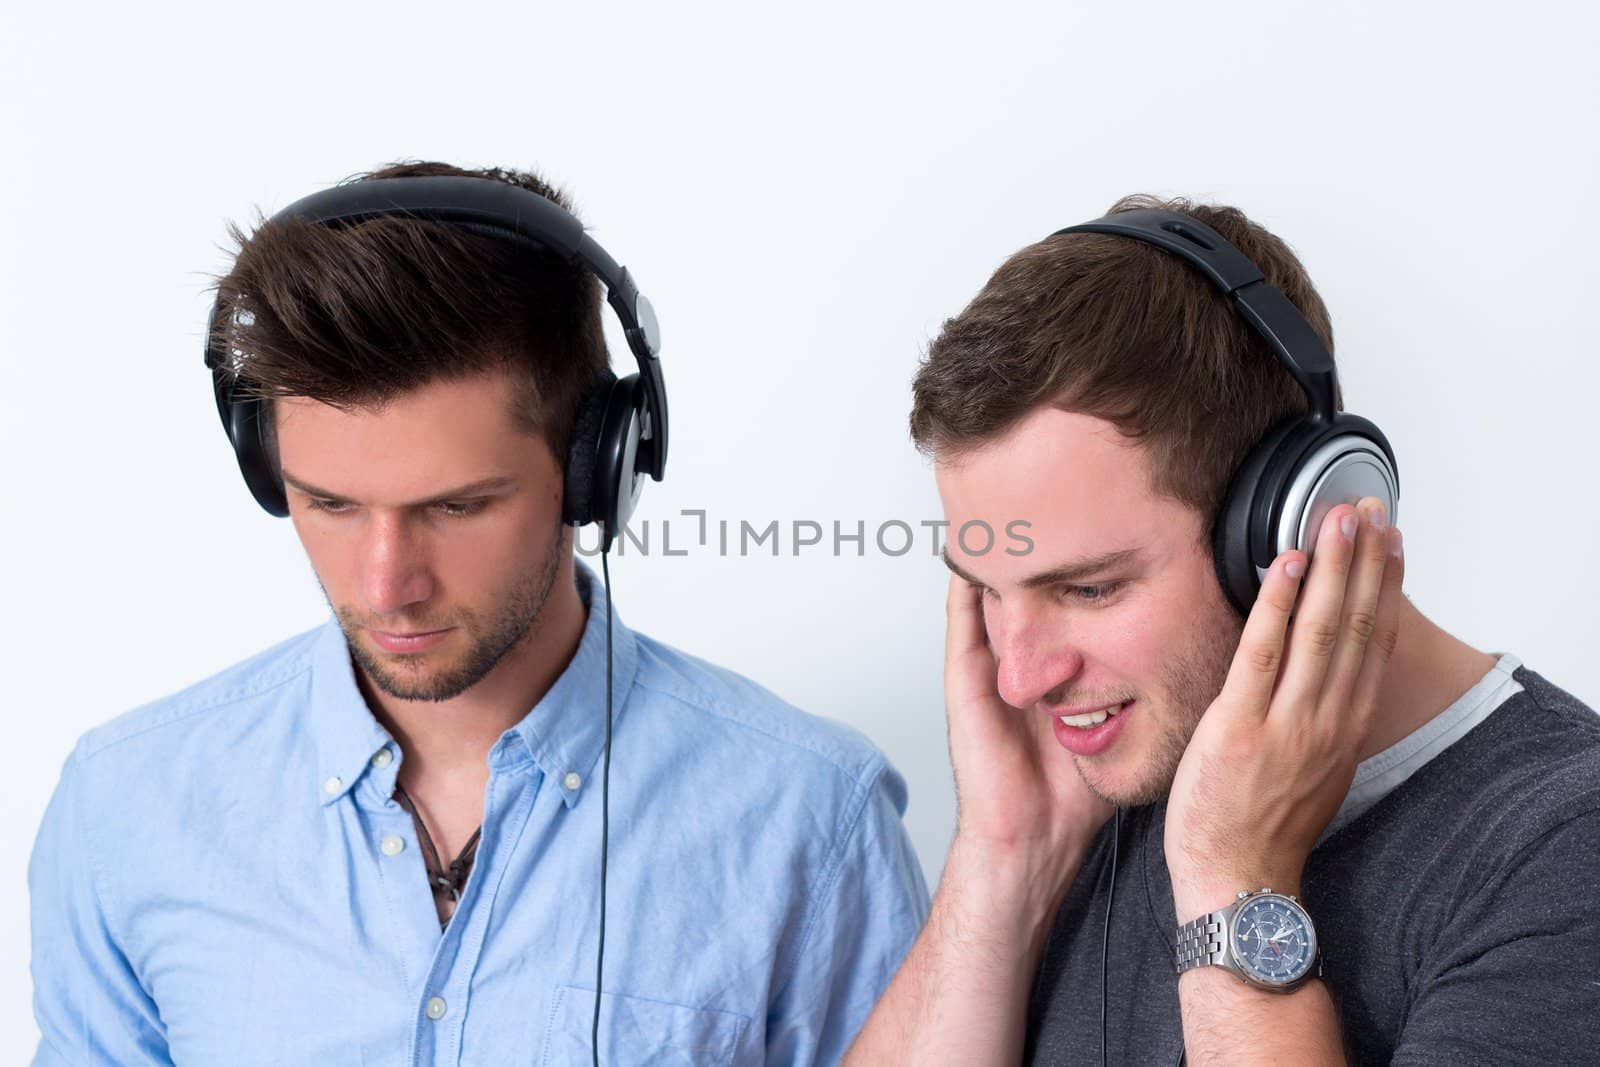 Two friends with headphone listening to music in front of a white background